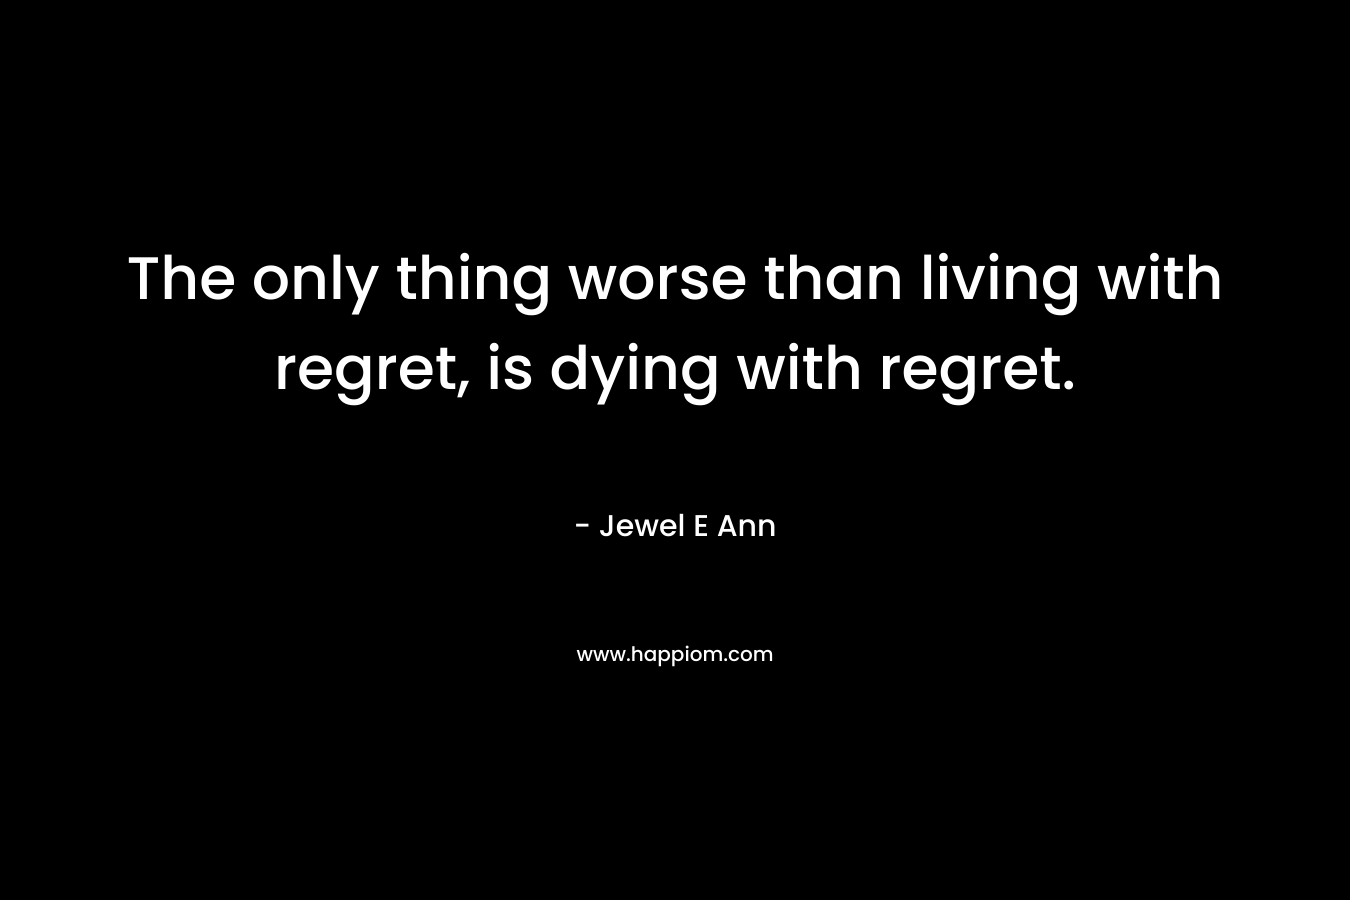 The only thing worse than living with regret, is dying with regret.